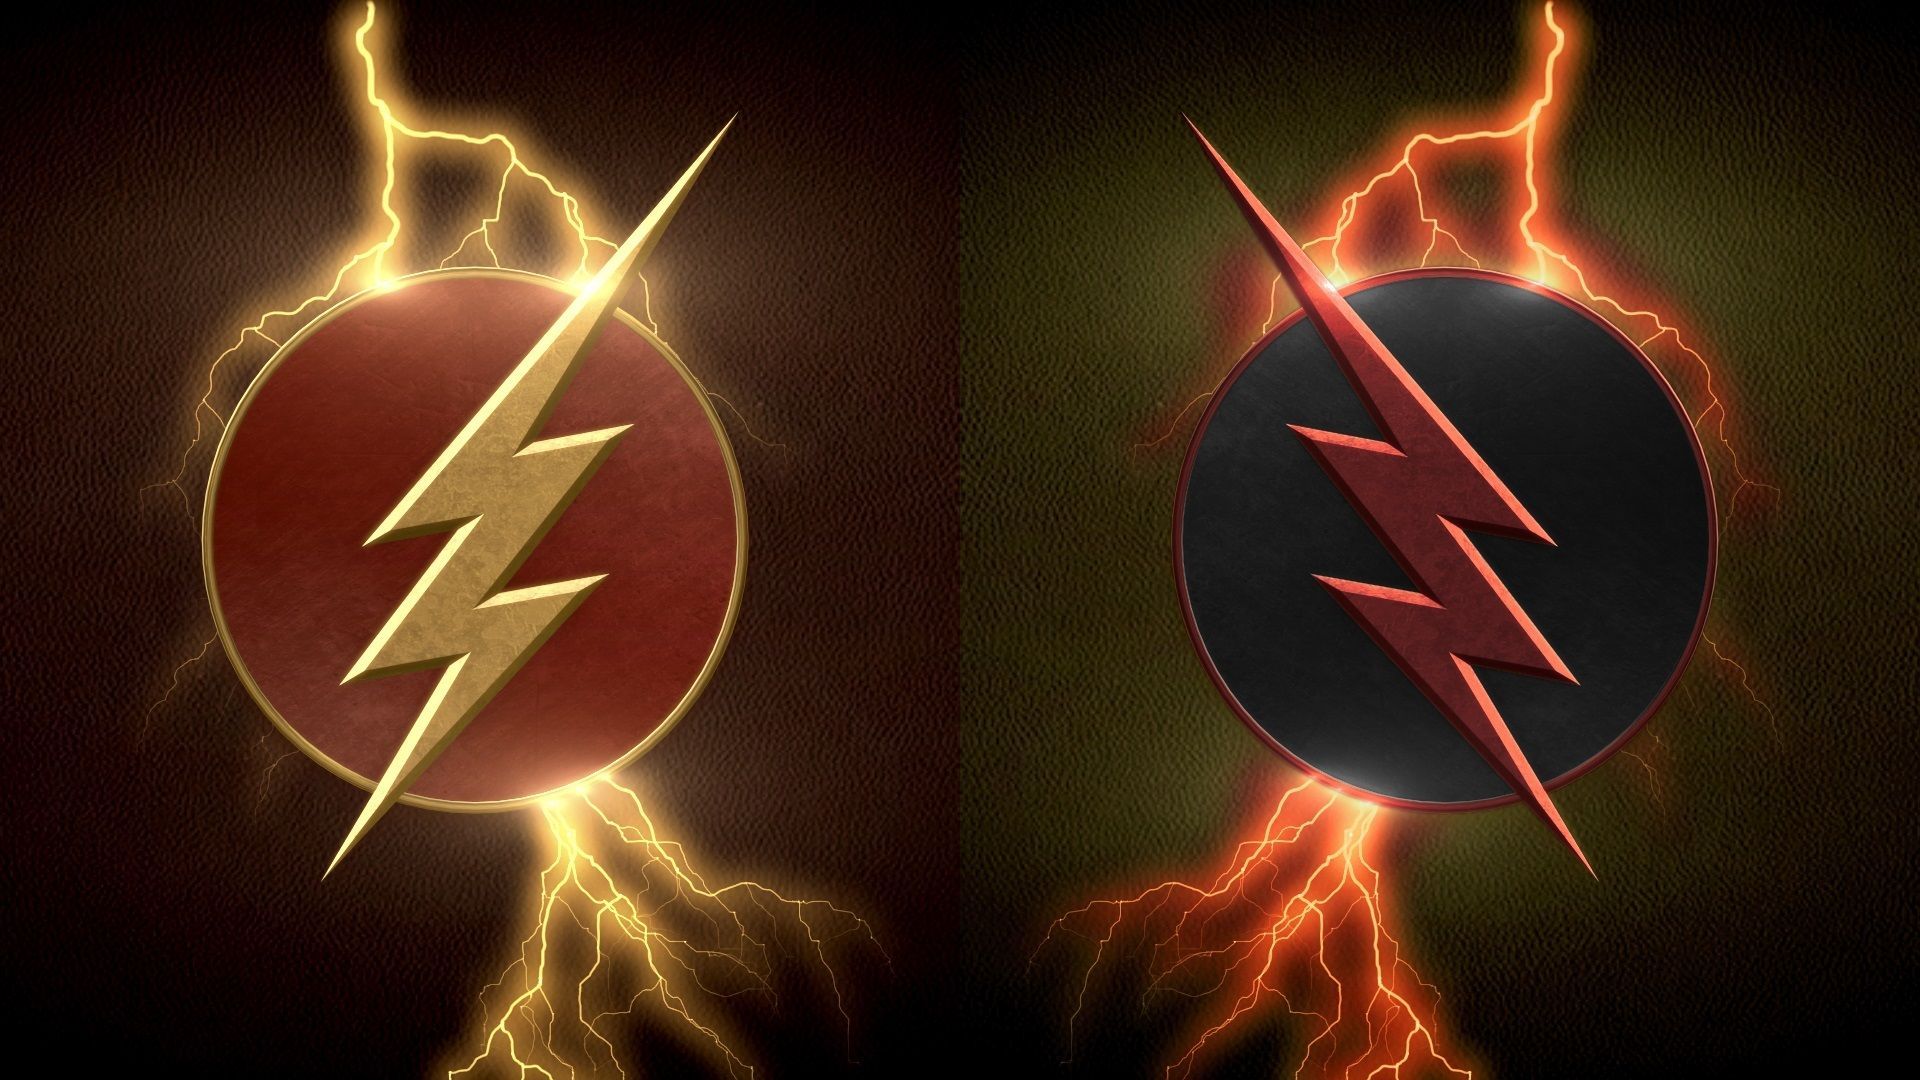 The Flash 1920x1080 wallpapers - Album on Imgur